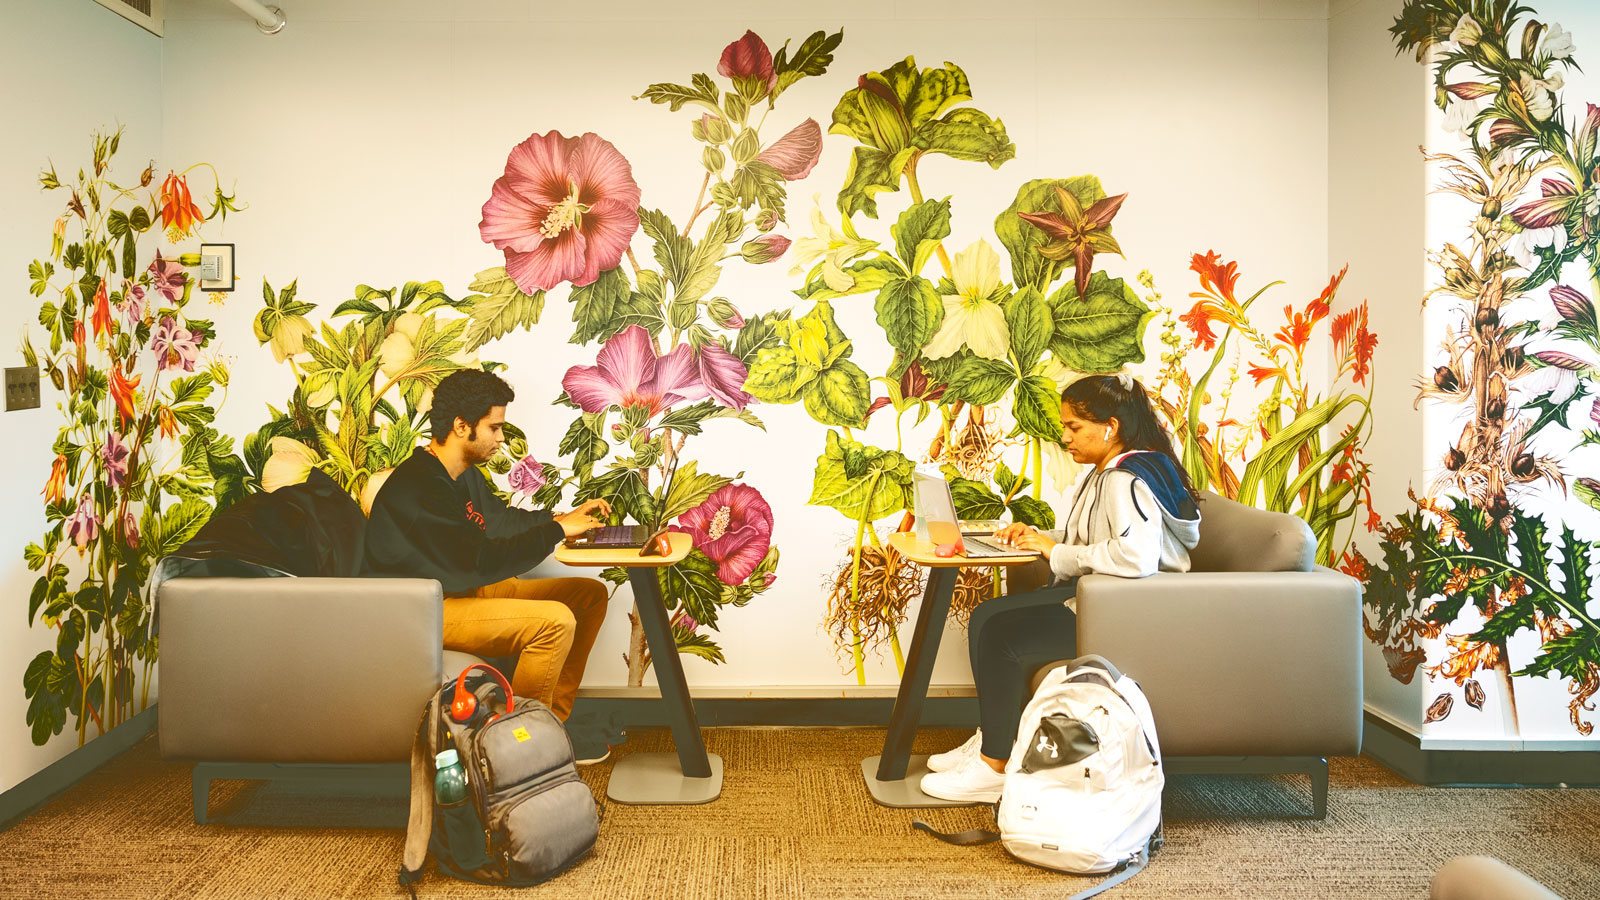 View of the large floral illustrations on the walls of the Peter C. Meinig 1961 Memorial Reading Room in Olin Library